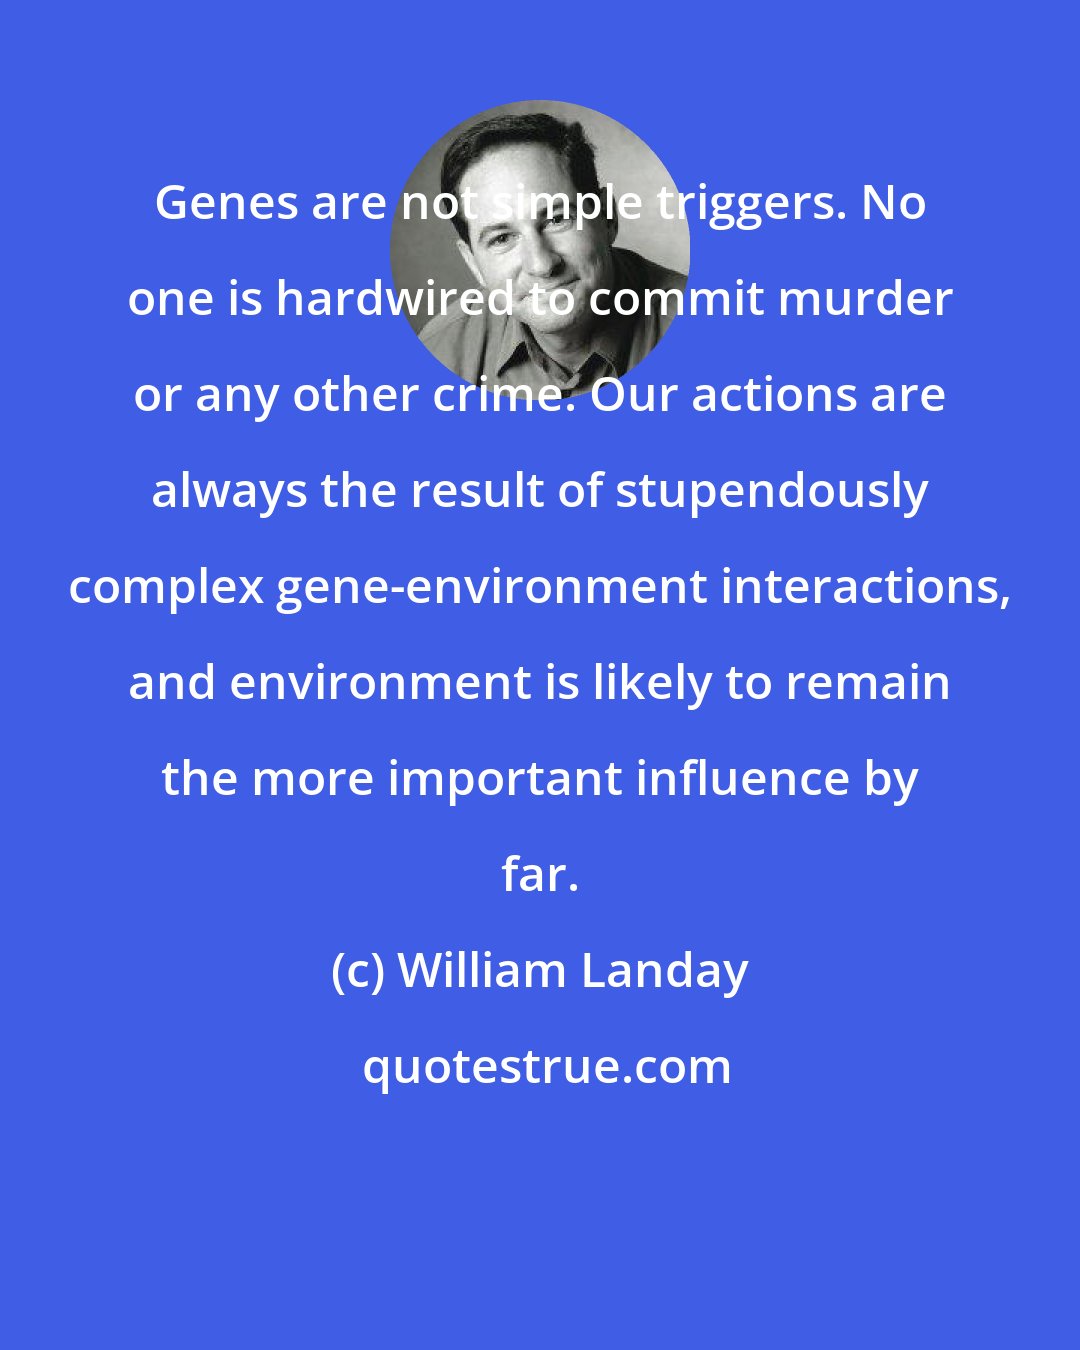 William Landay: Genes are not simple triggers. No one is hardwired to commit murder or any other crime. Our actions are always the result of stupendously complex gene-environment interactions, and environment is likely to remain the more important influence by far.